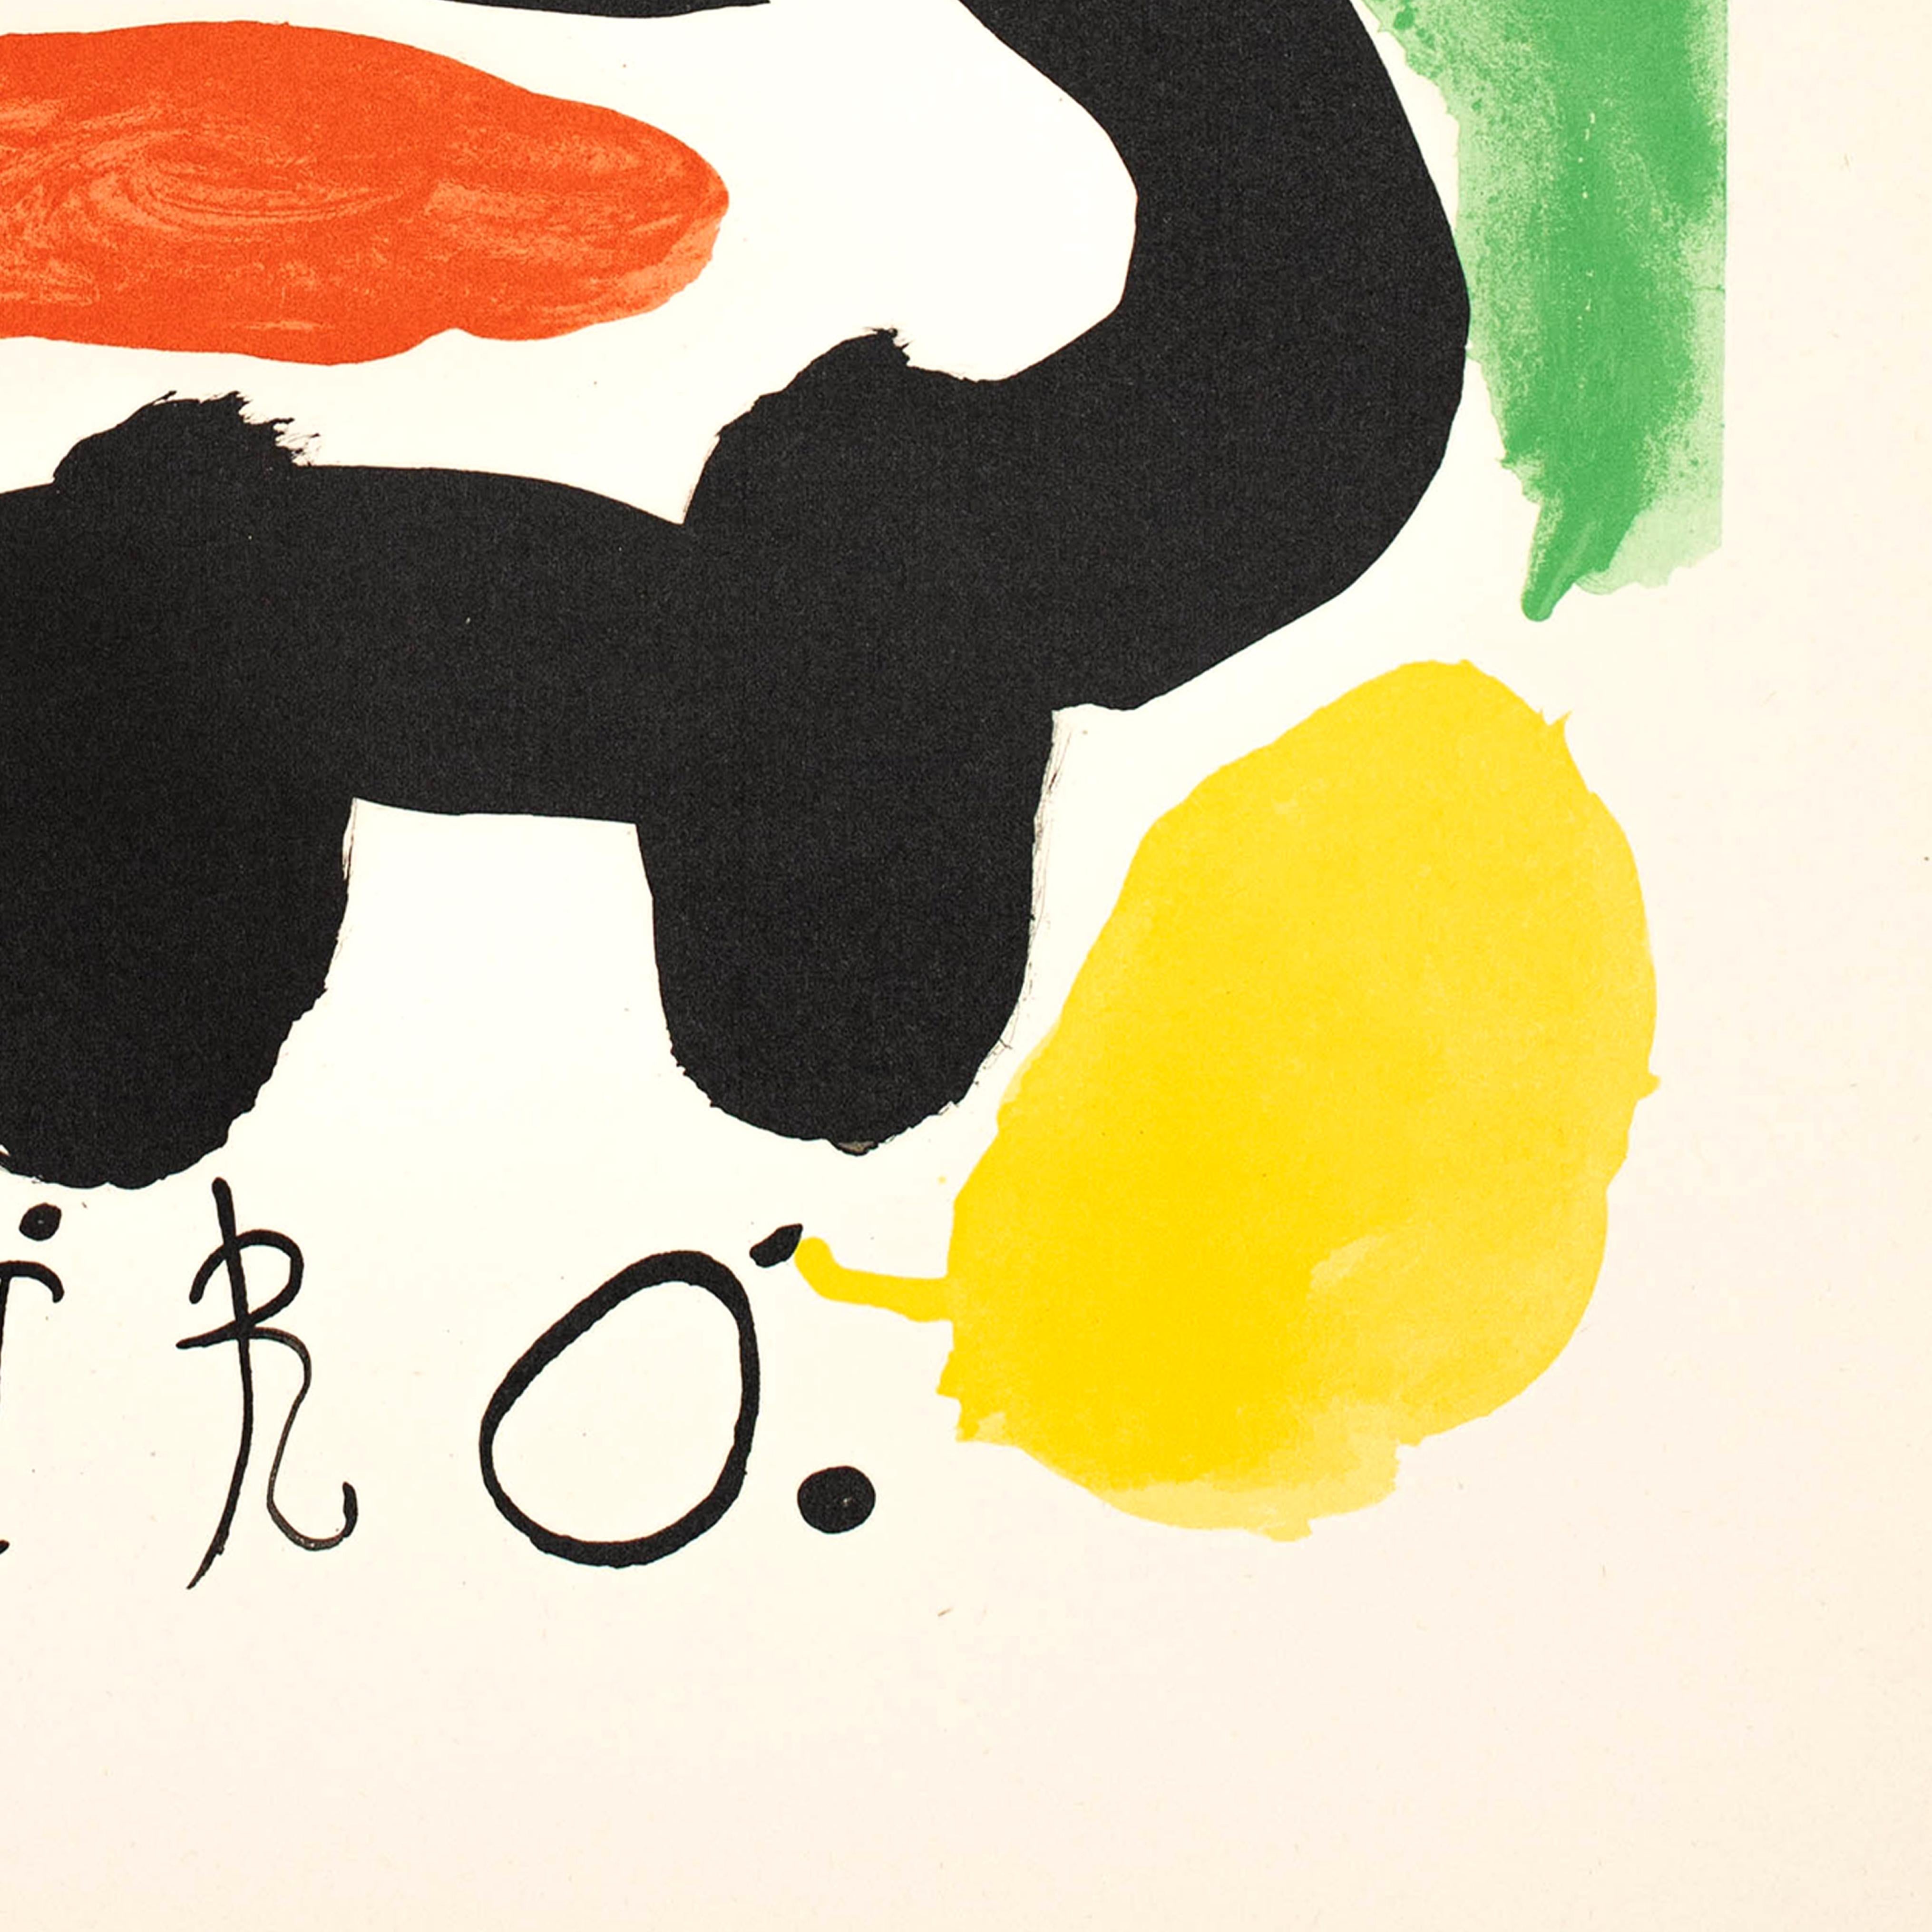 Mid-20th Century Joan Miró Lithography, circa 1950 For Sale